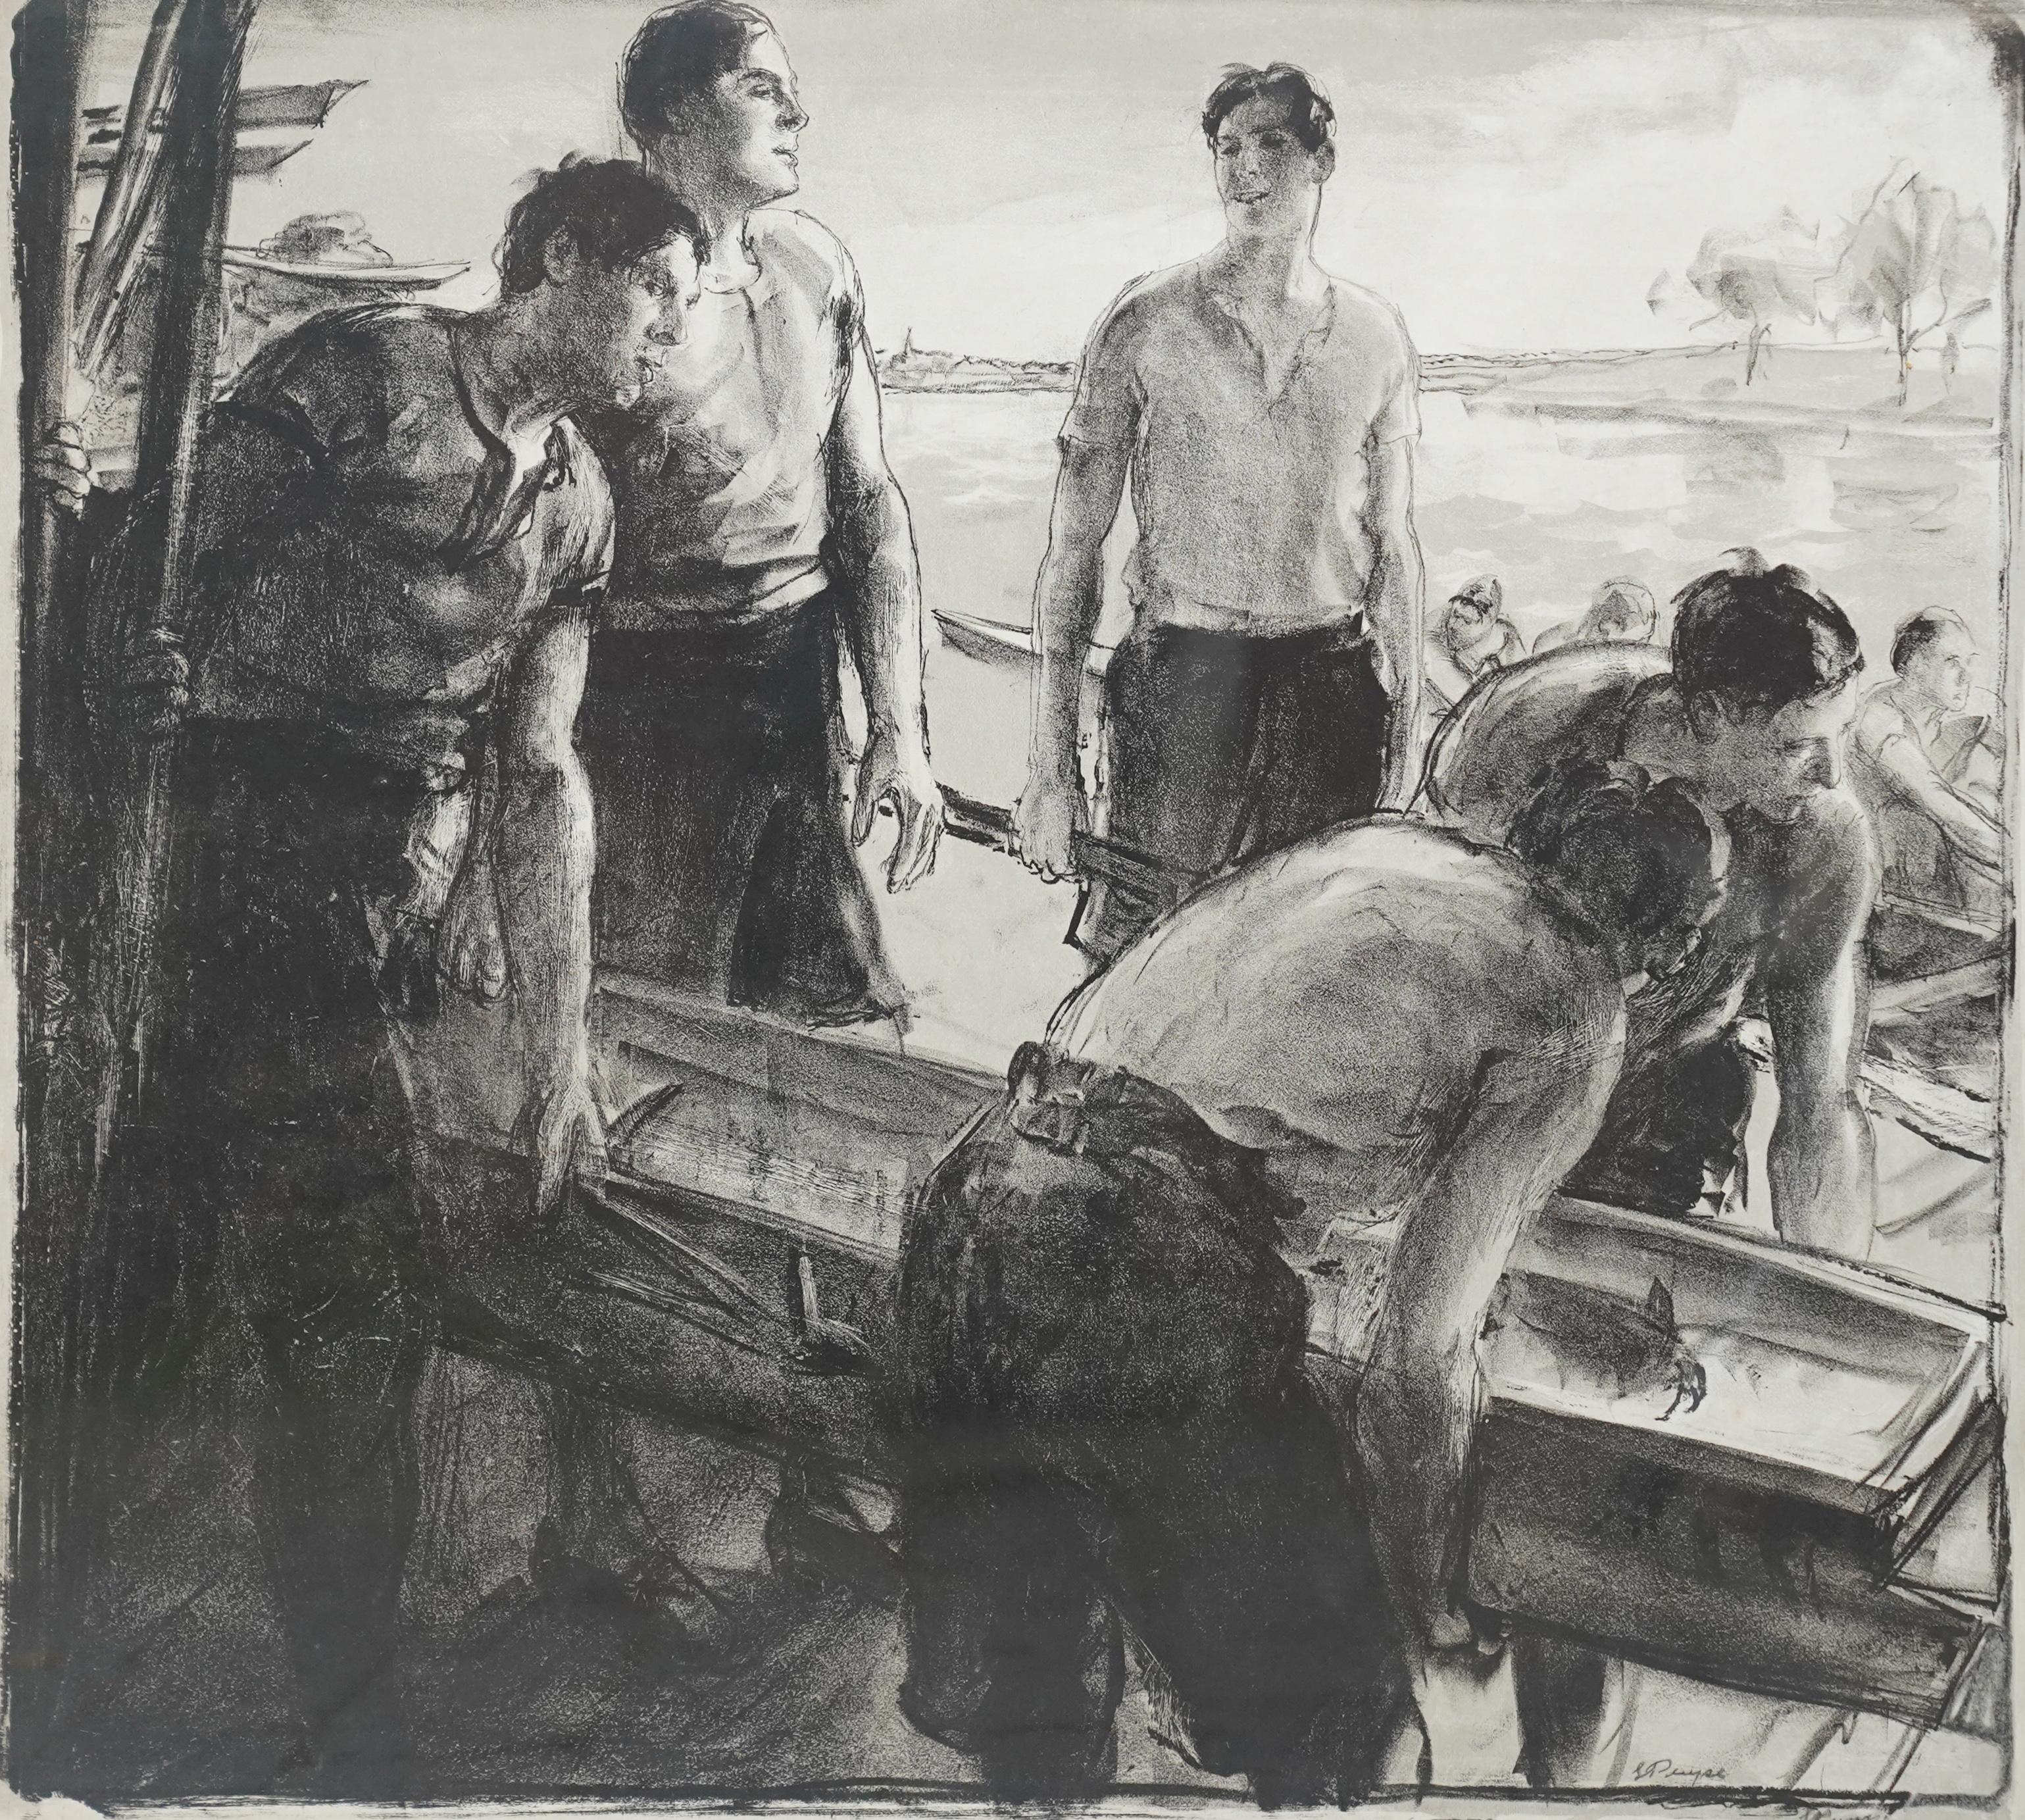 Rowers Before the Race - British 1930's art sport lithograph rowing - Realist Art by Spencer Pryse